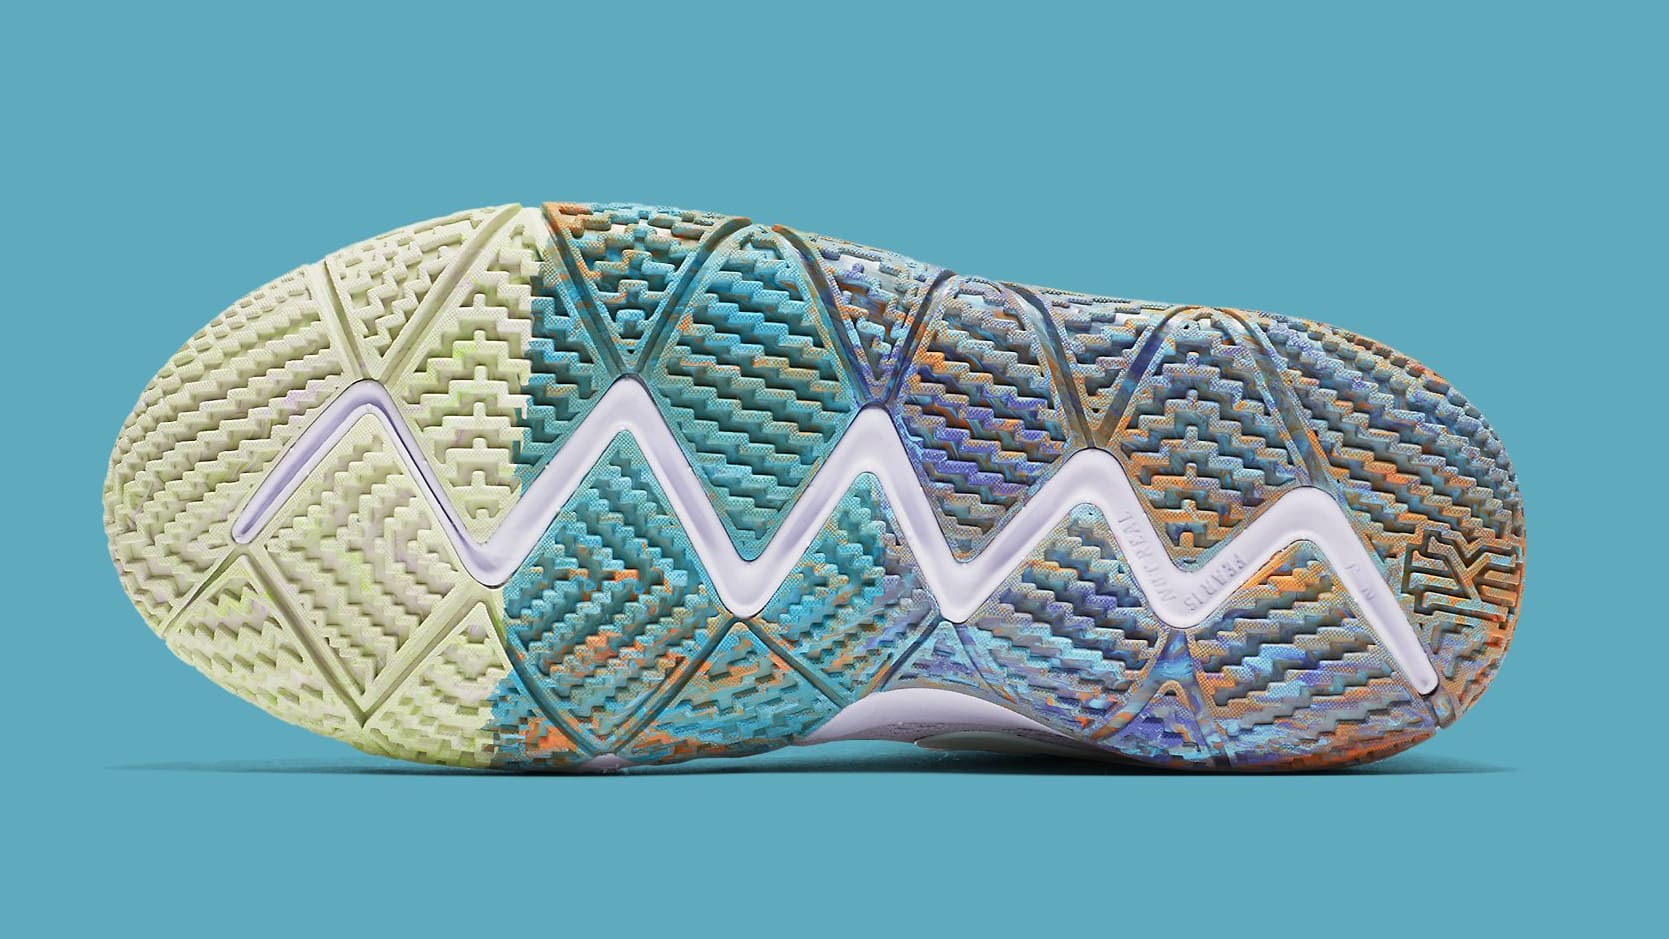 kyrie 4 90s release date